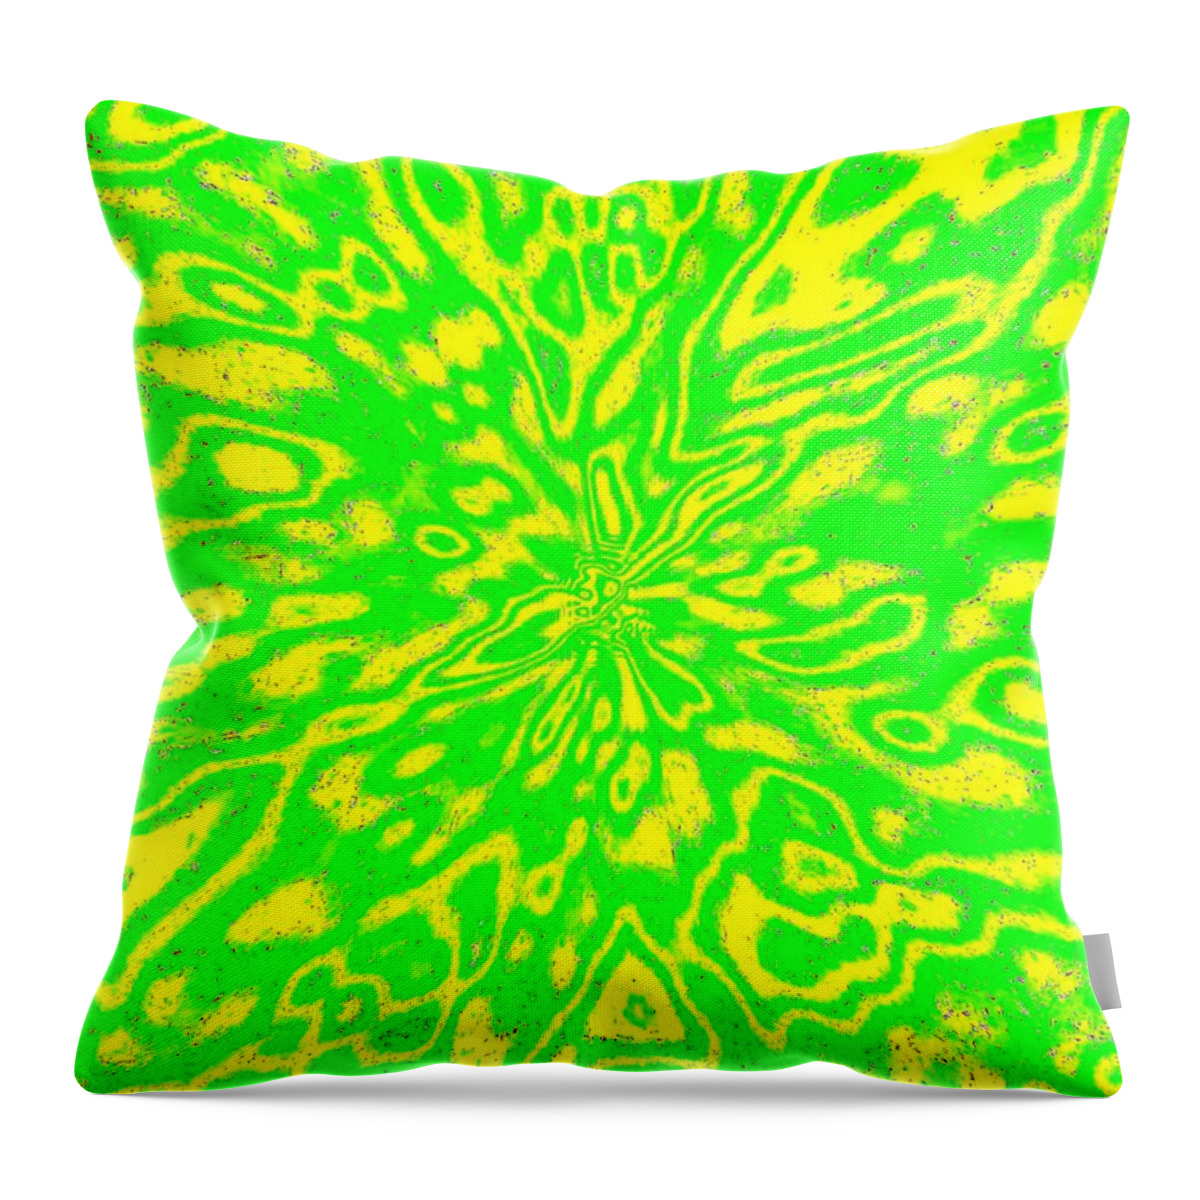 Abstract Throw Pillow featuring the digital art Harmony 16 by Will Borden